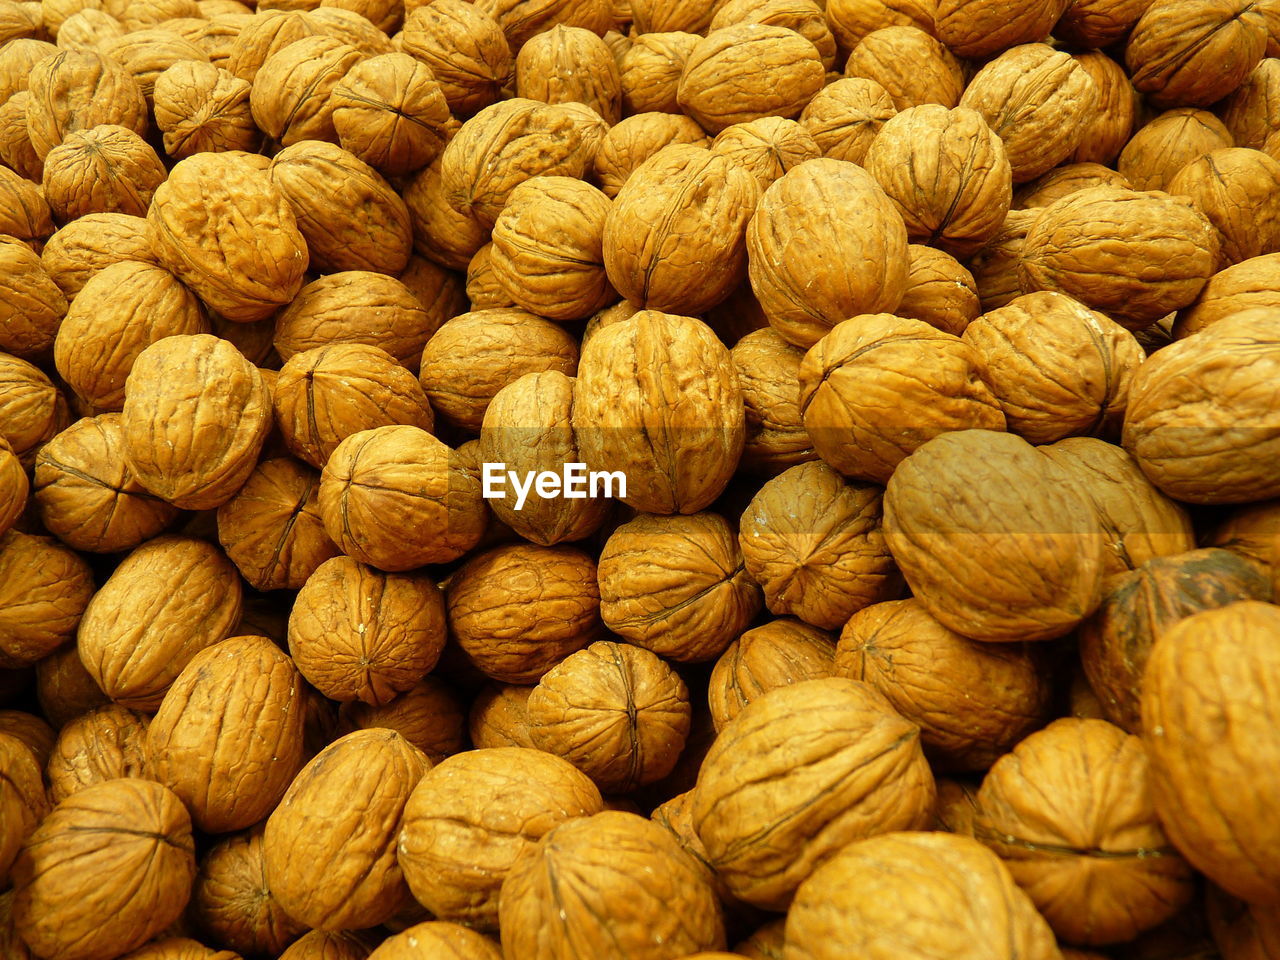 In-shell walnuts are drupes of the genus juglans